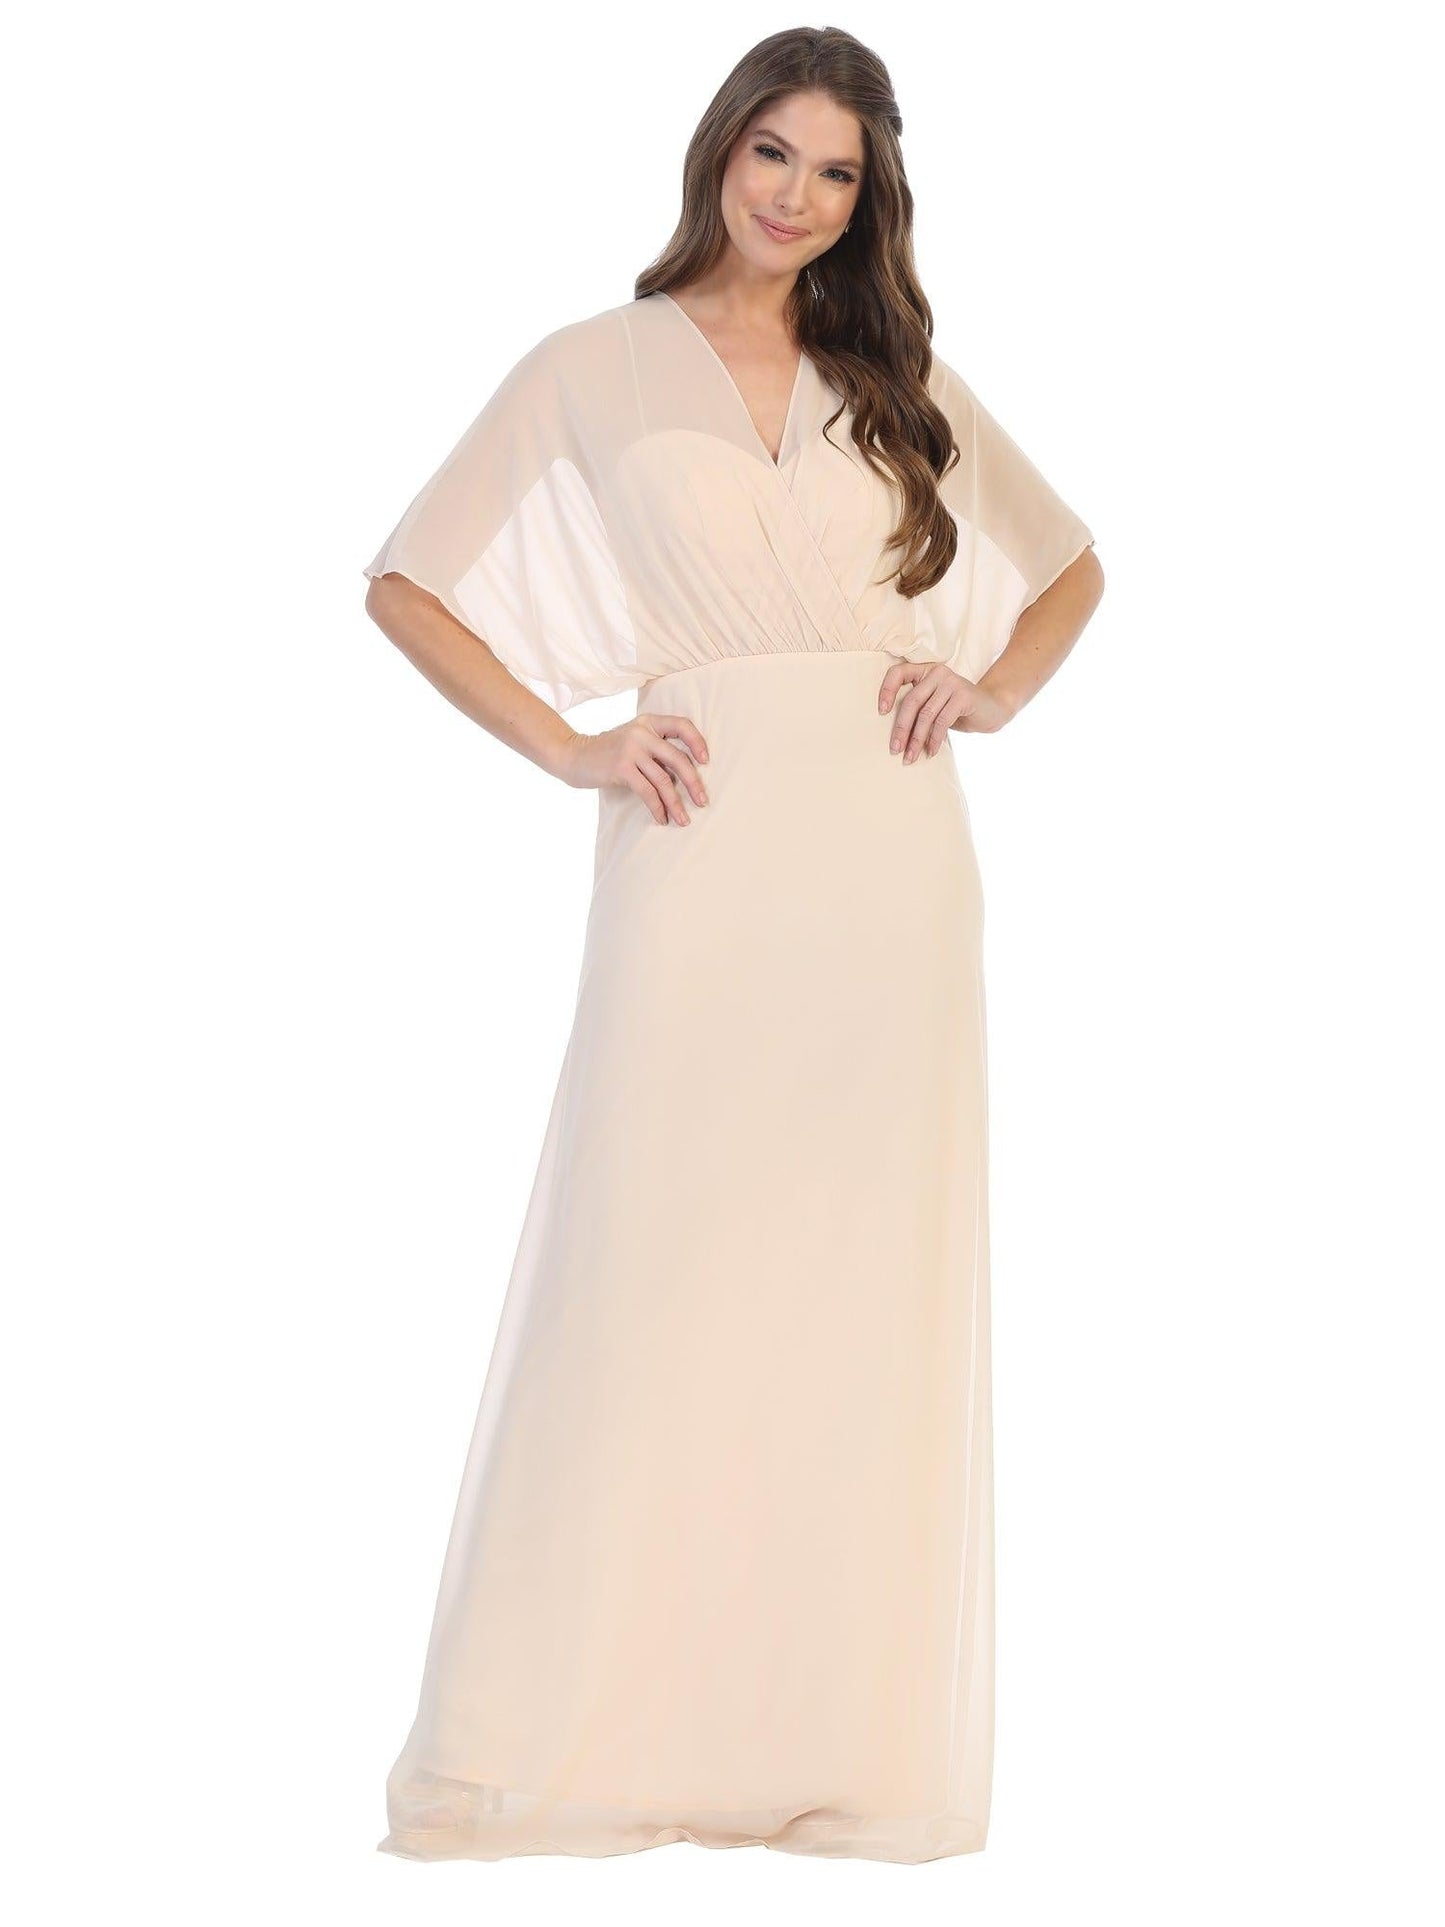 Long Formal Mother of the Bride Draped Chiffon Gown - The Dress Outlet